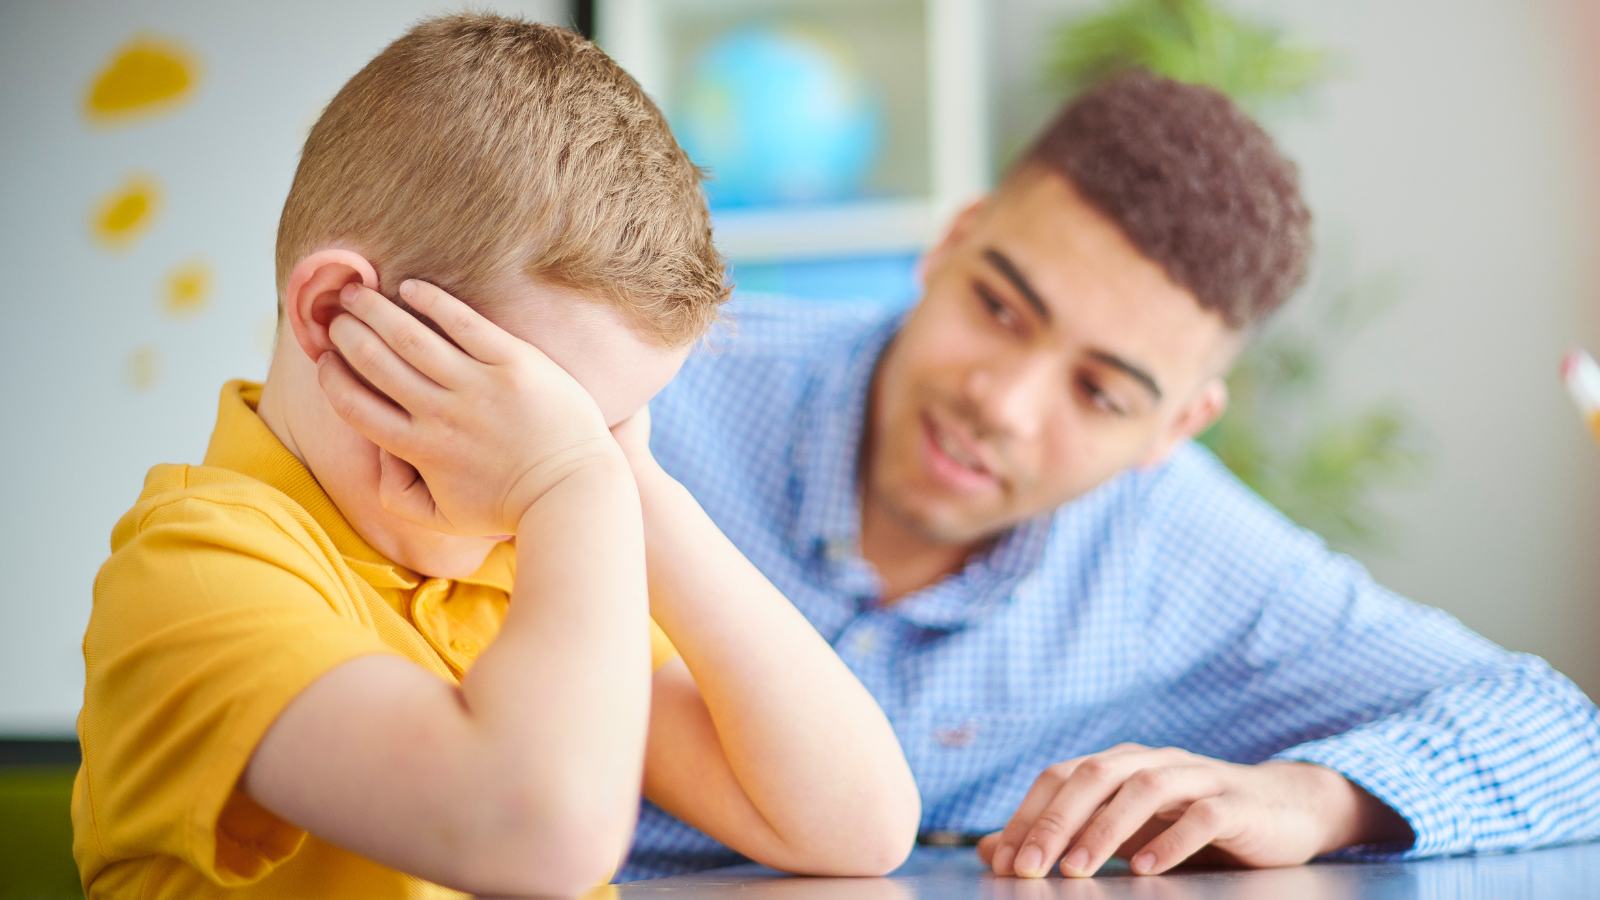 A Teacher’s Guide to Responding to Challenging Behavior in Young Children